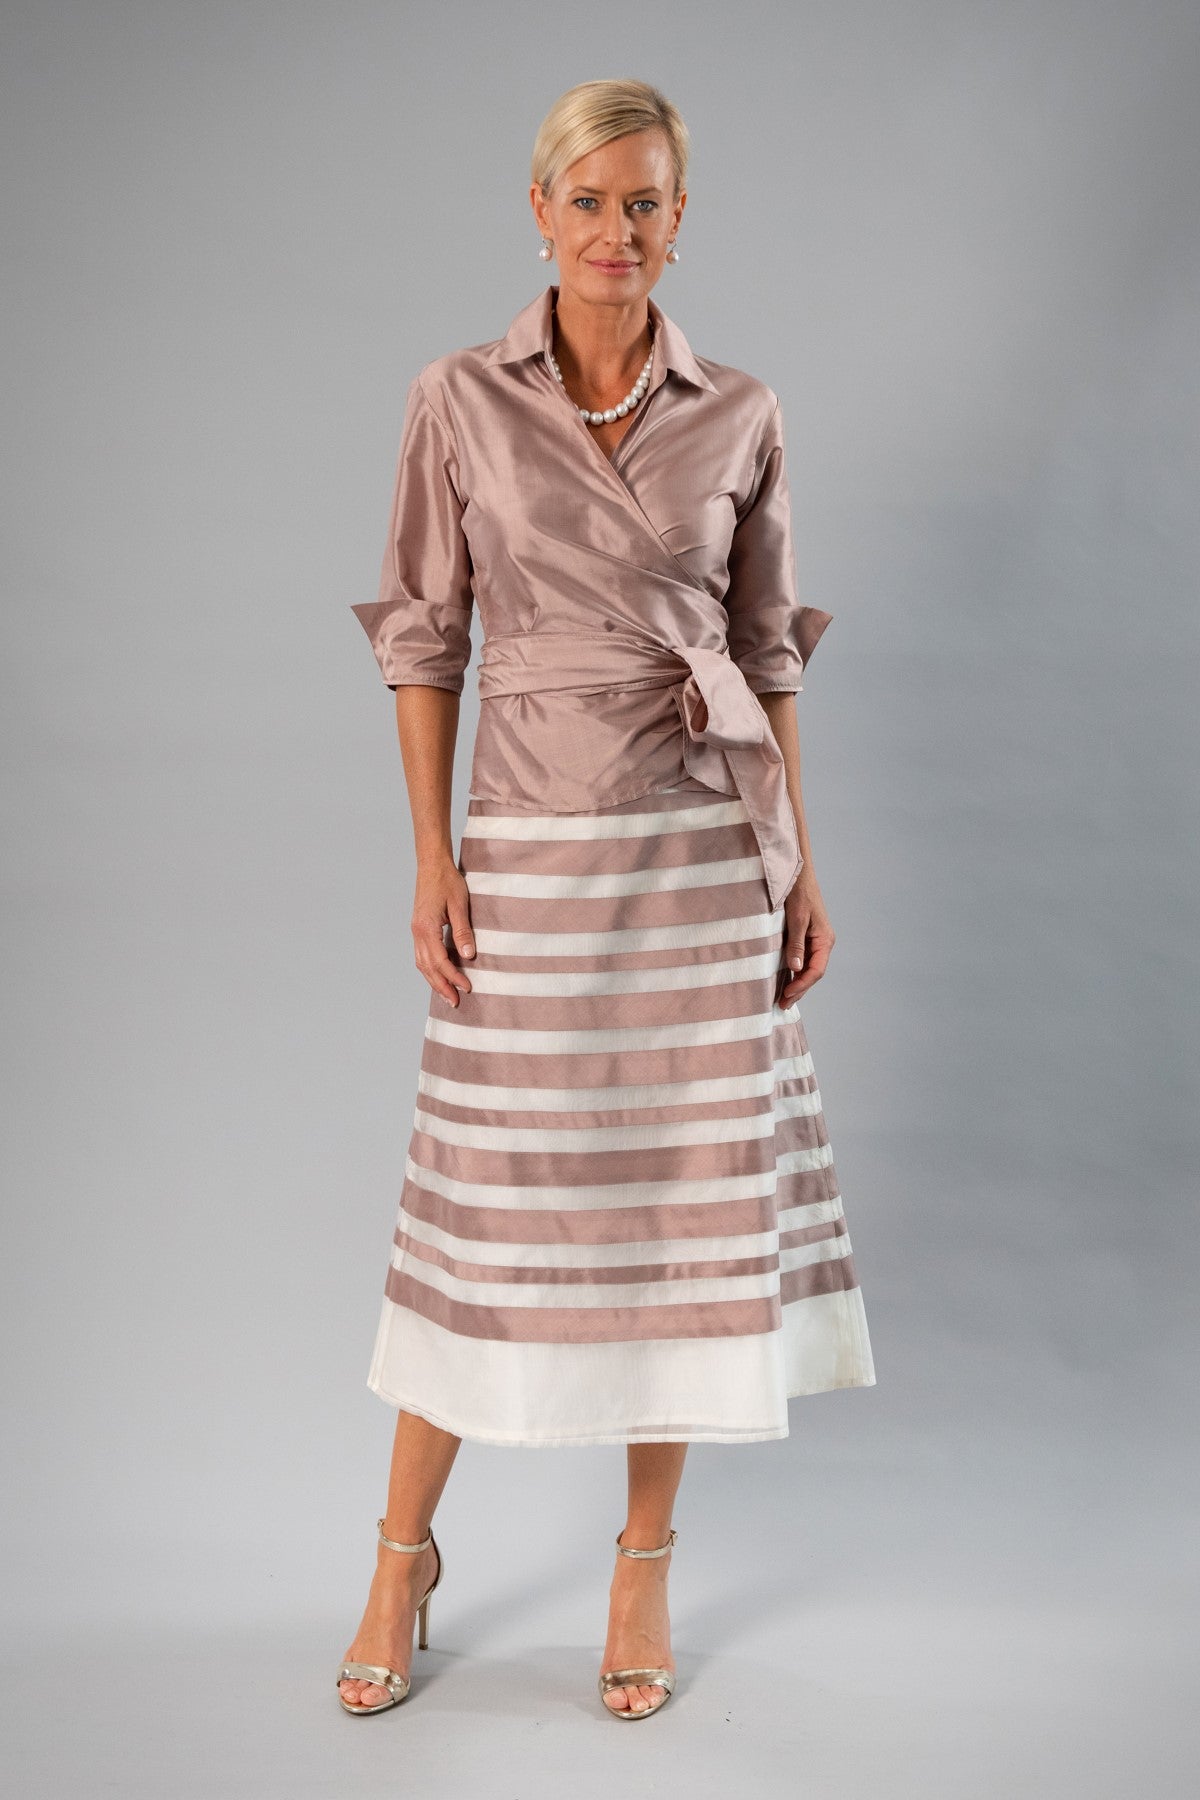 Zambi Tea Length Skirt - Coffee + Ivory for the Mother of the Bride / Groom